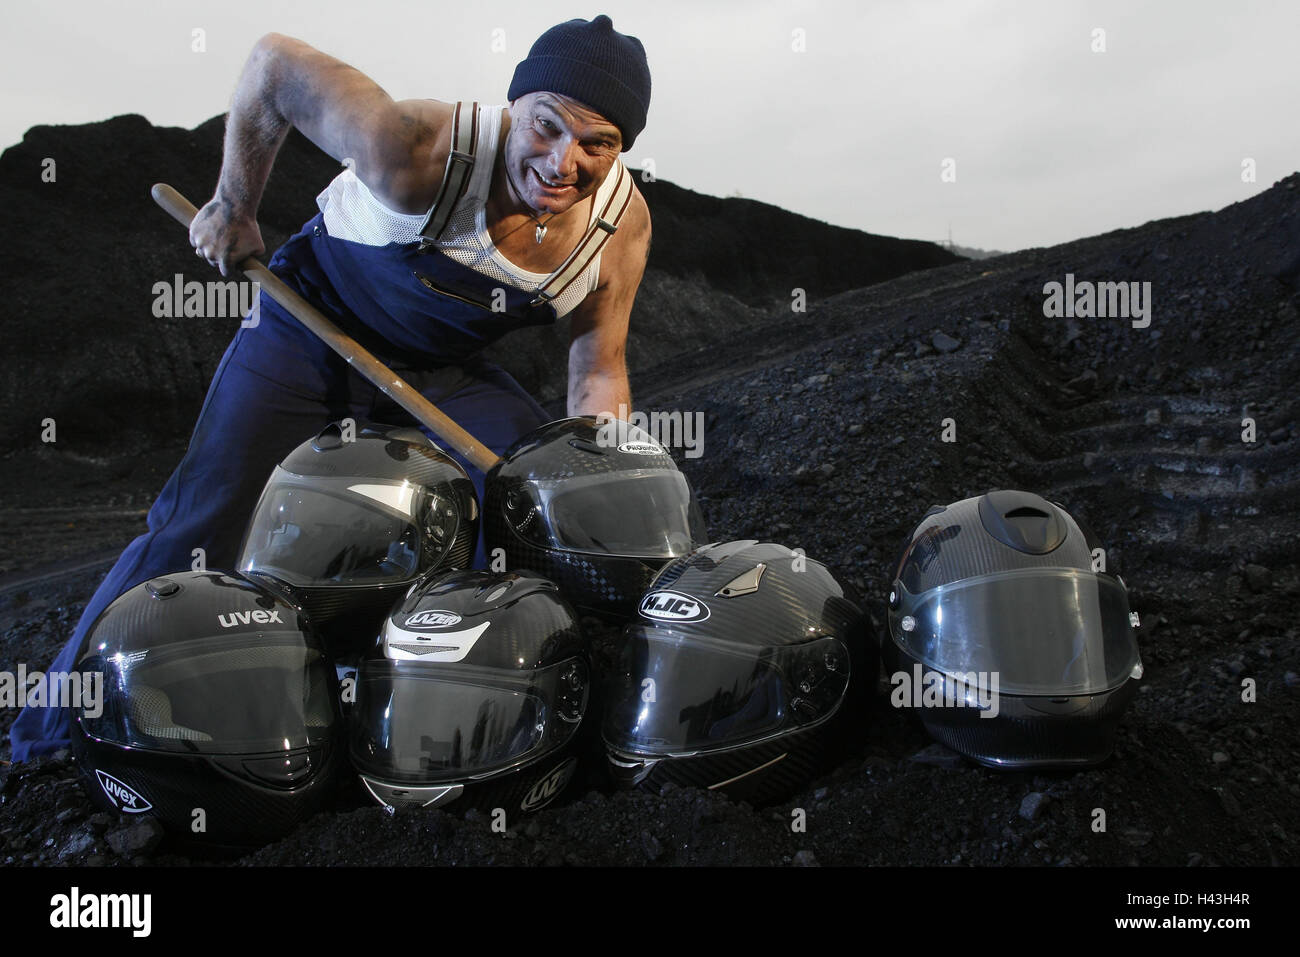 Workers, coal dump, shovel, motorbike helmets, black, people, man, shovel, coal, conception, icon, security, protection, helmets, safety helmets, humor, dig, dig, dig out, carbon fibers, carbon, carbon, material, colour, outside, jet-black, marks, companies, passed away, Stock Photo